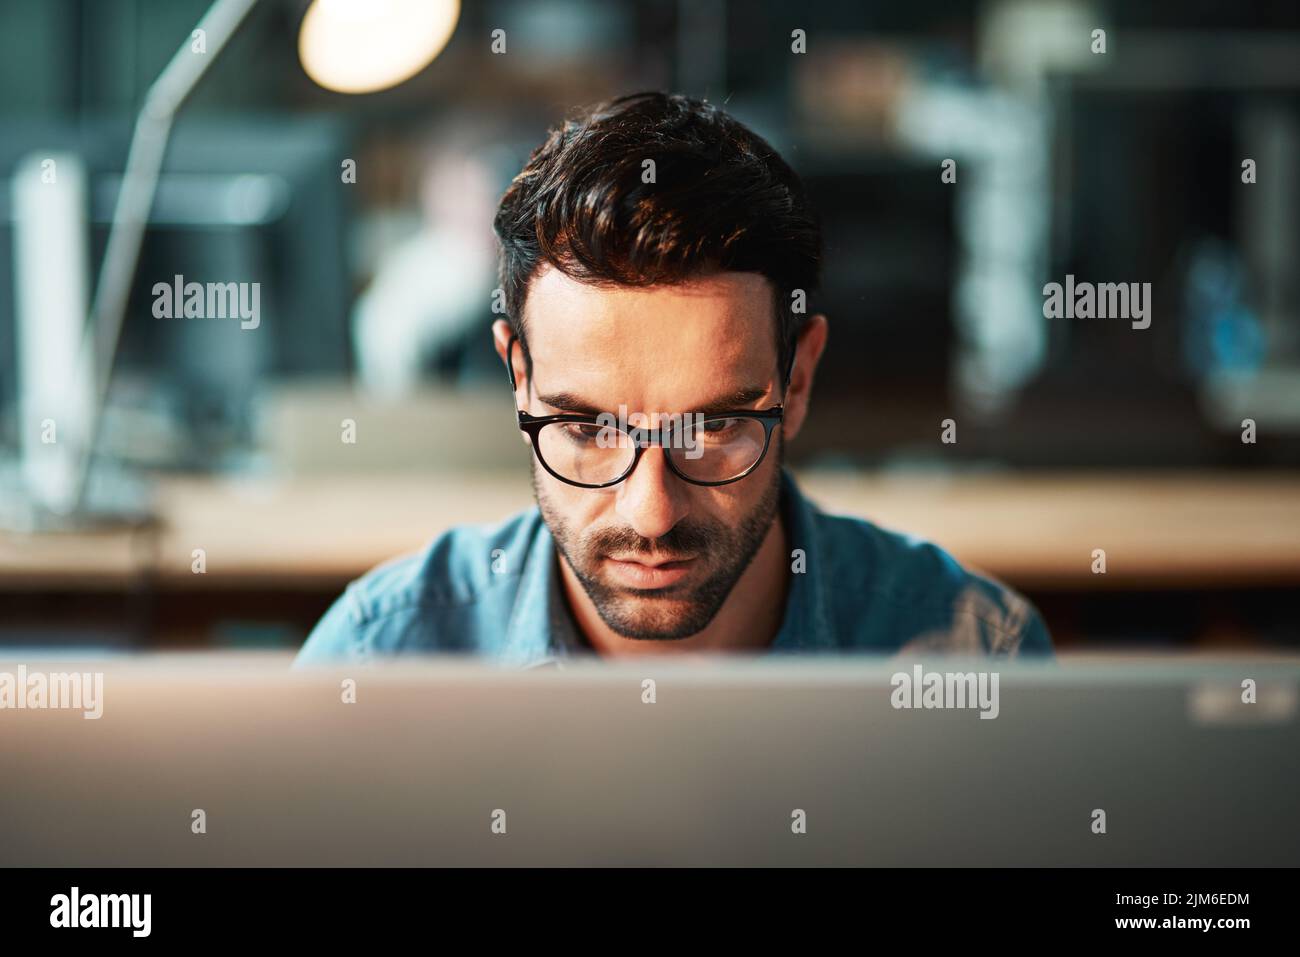 Serious business man working at computer late in the office at night to finish reports, articles or code. Focused and young male IT worker wearing Stock Photo